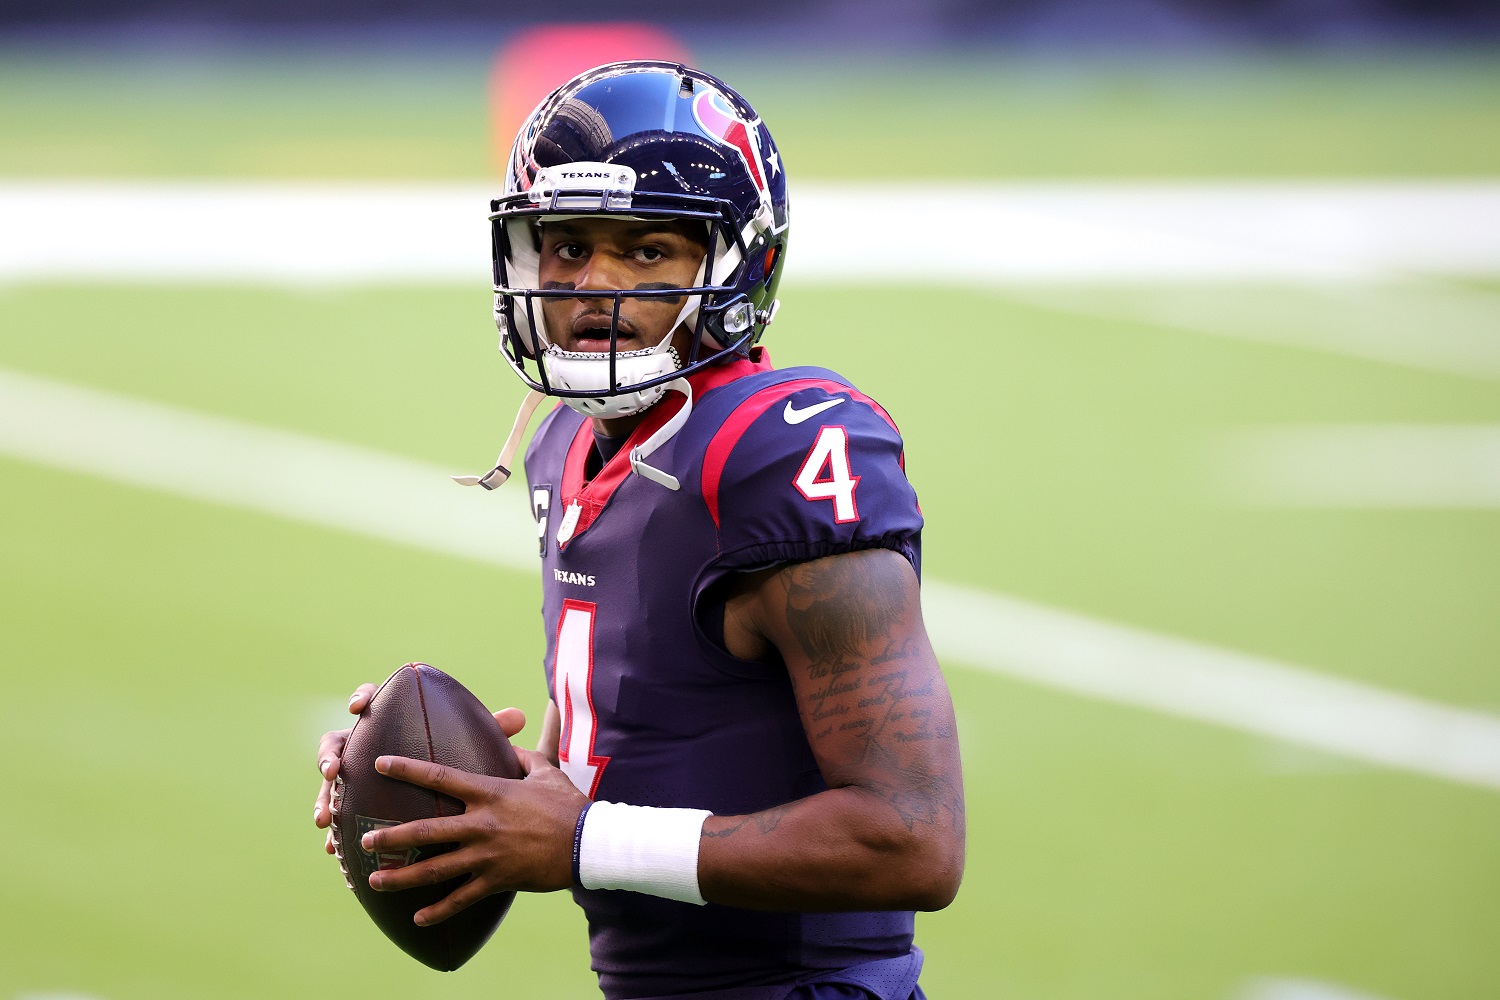 Deshaun Watson of the Houston Texans in action against the Tennessee Titans on Jan. 3, 2021, in Houston.